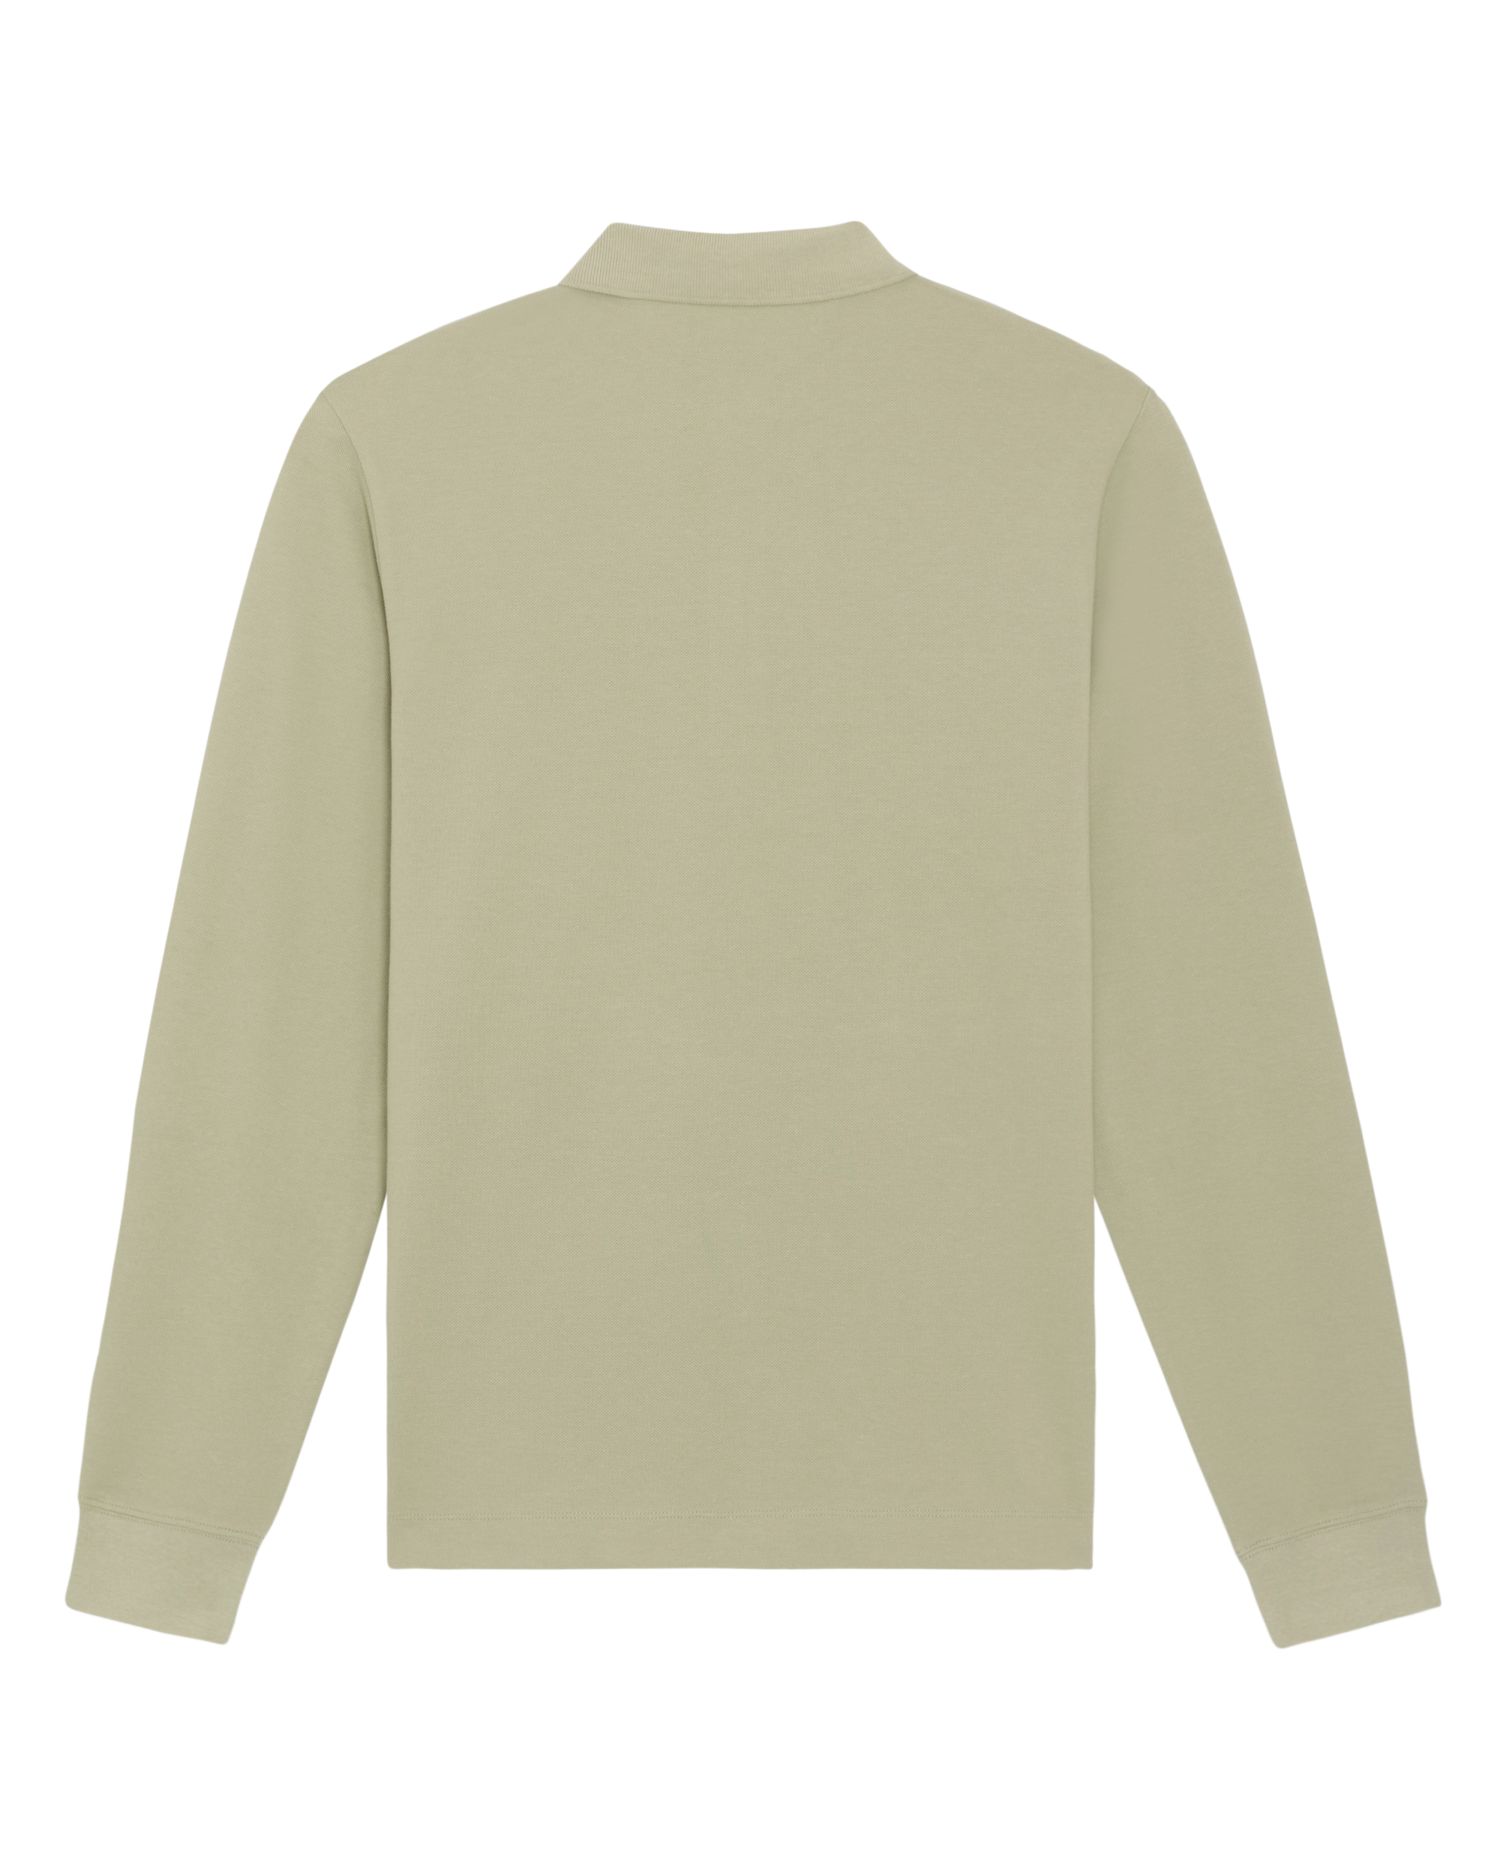  Prepster Long Sleeve in Farbe Sage